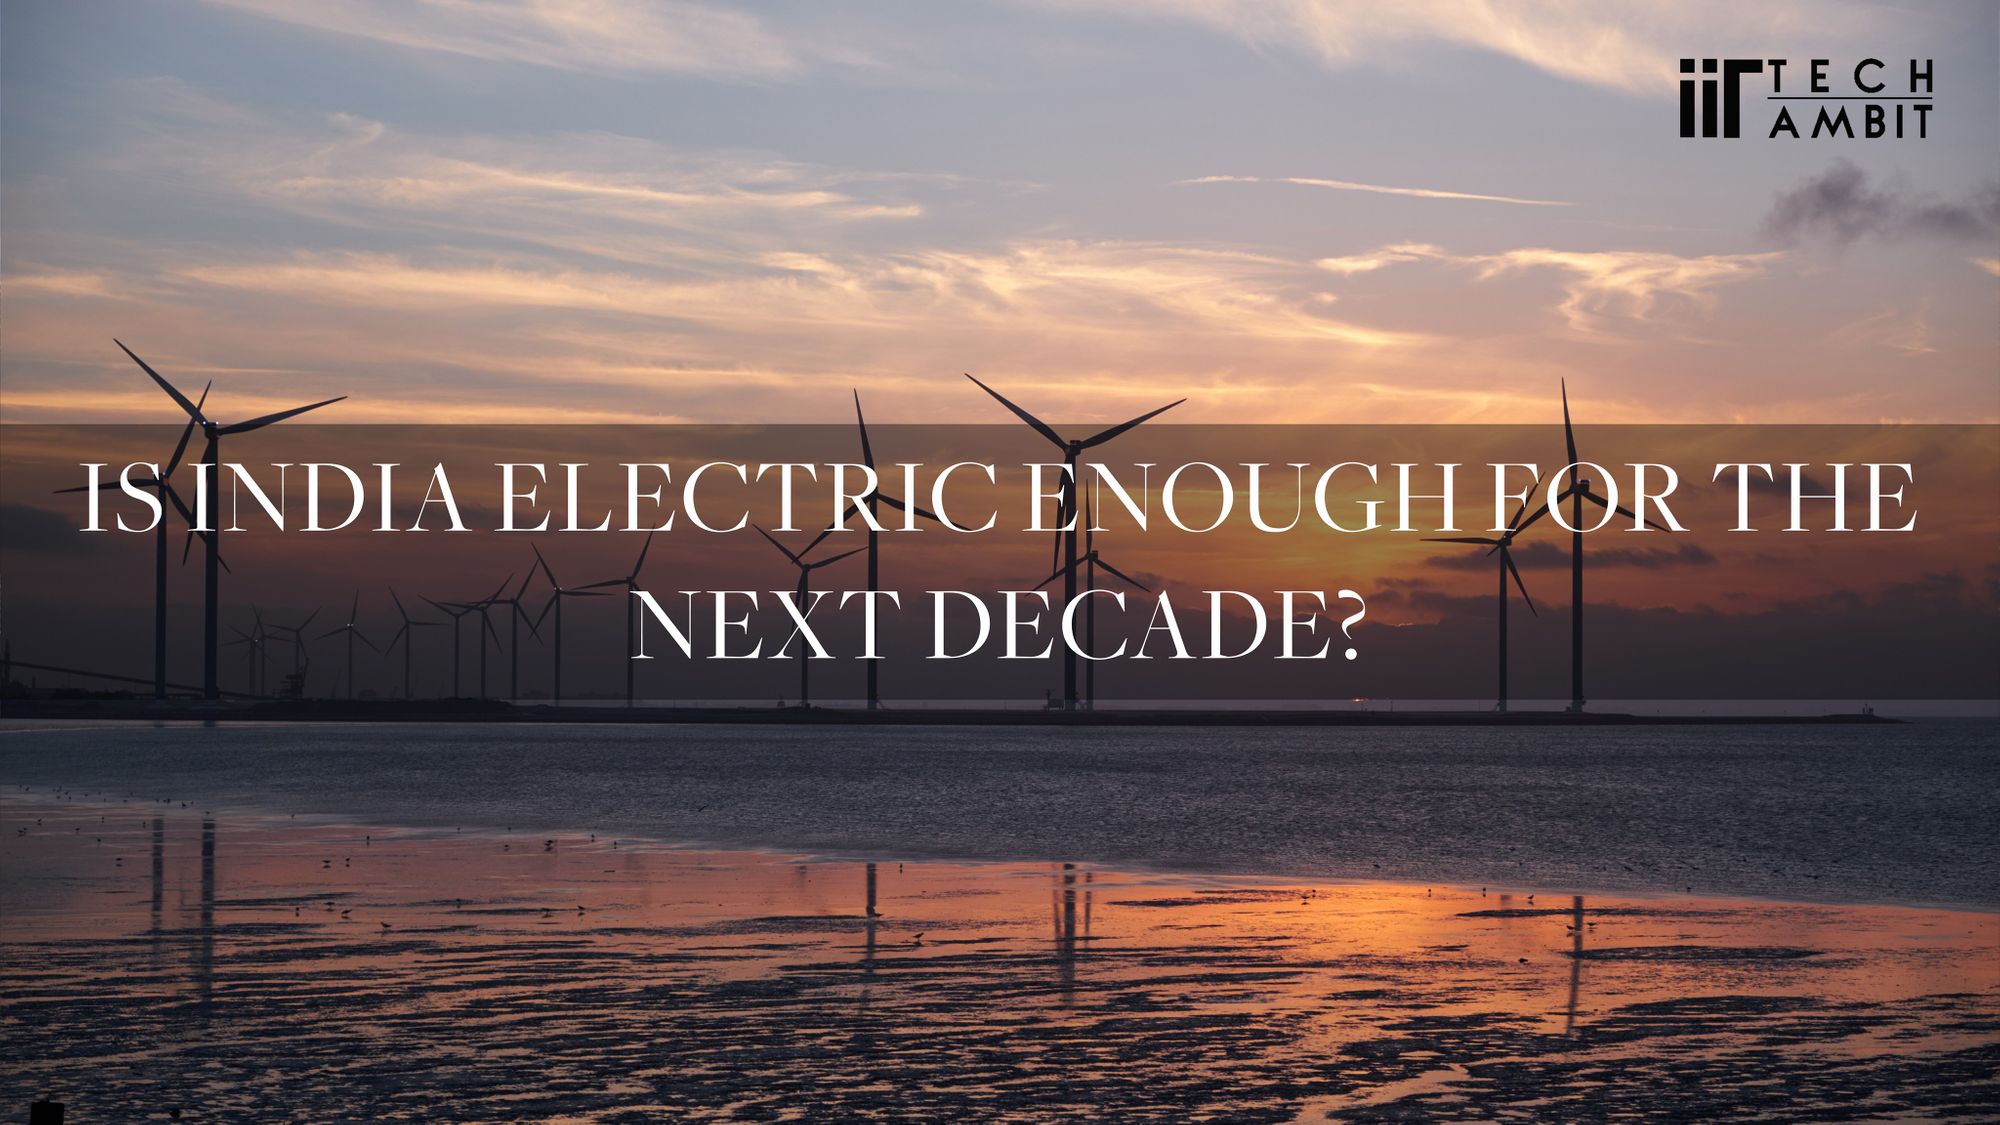 Is India Electric enough
for the next decade?